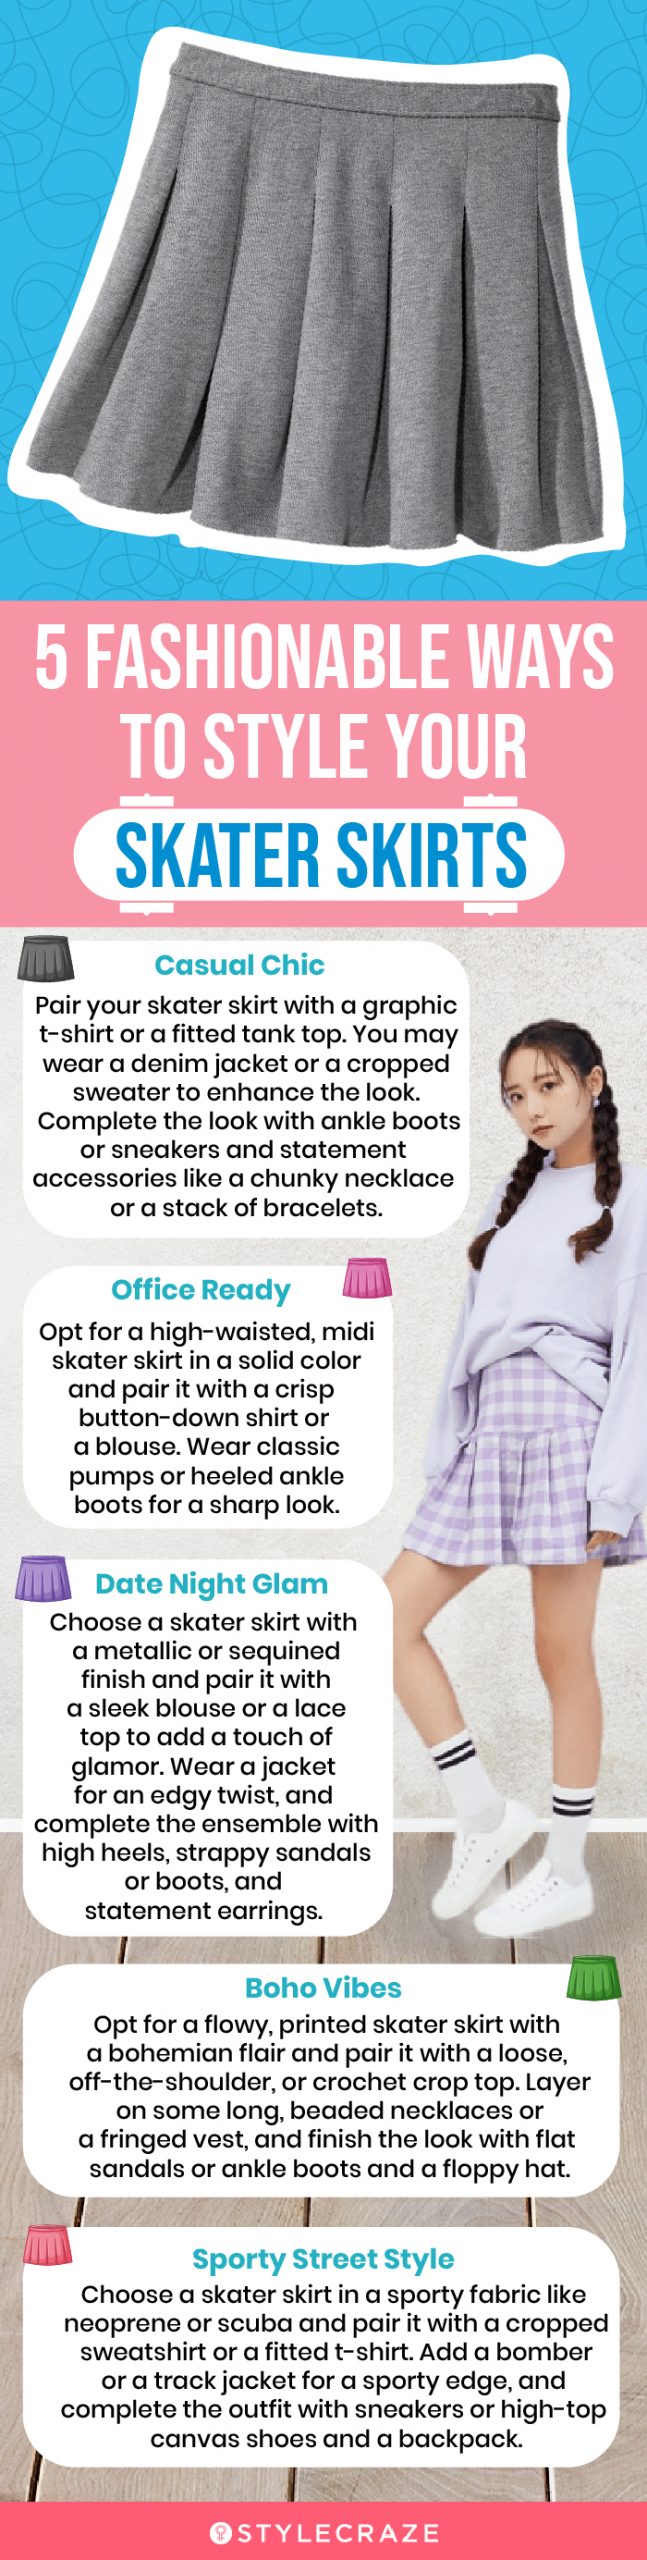 5 fashionable ways to style your skater skirts (infographic)